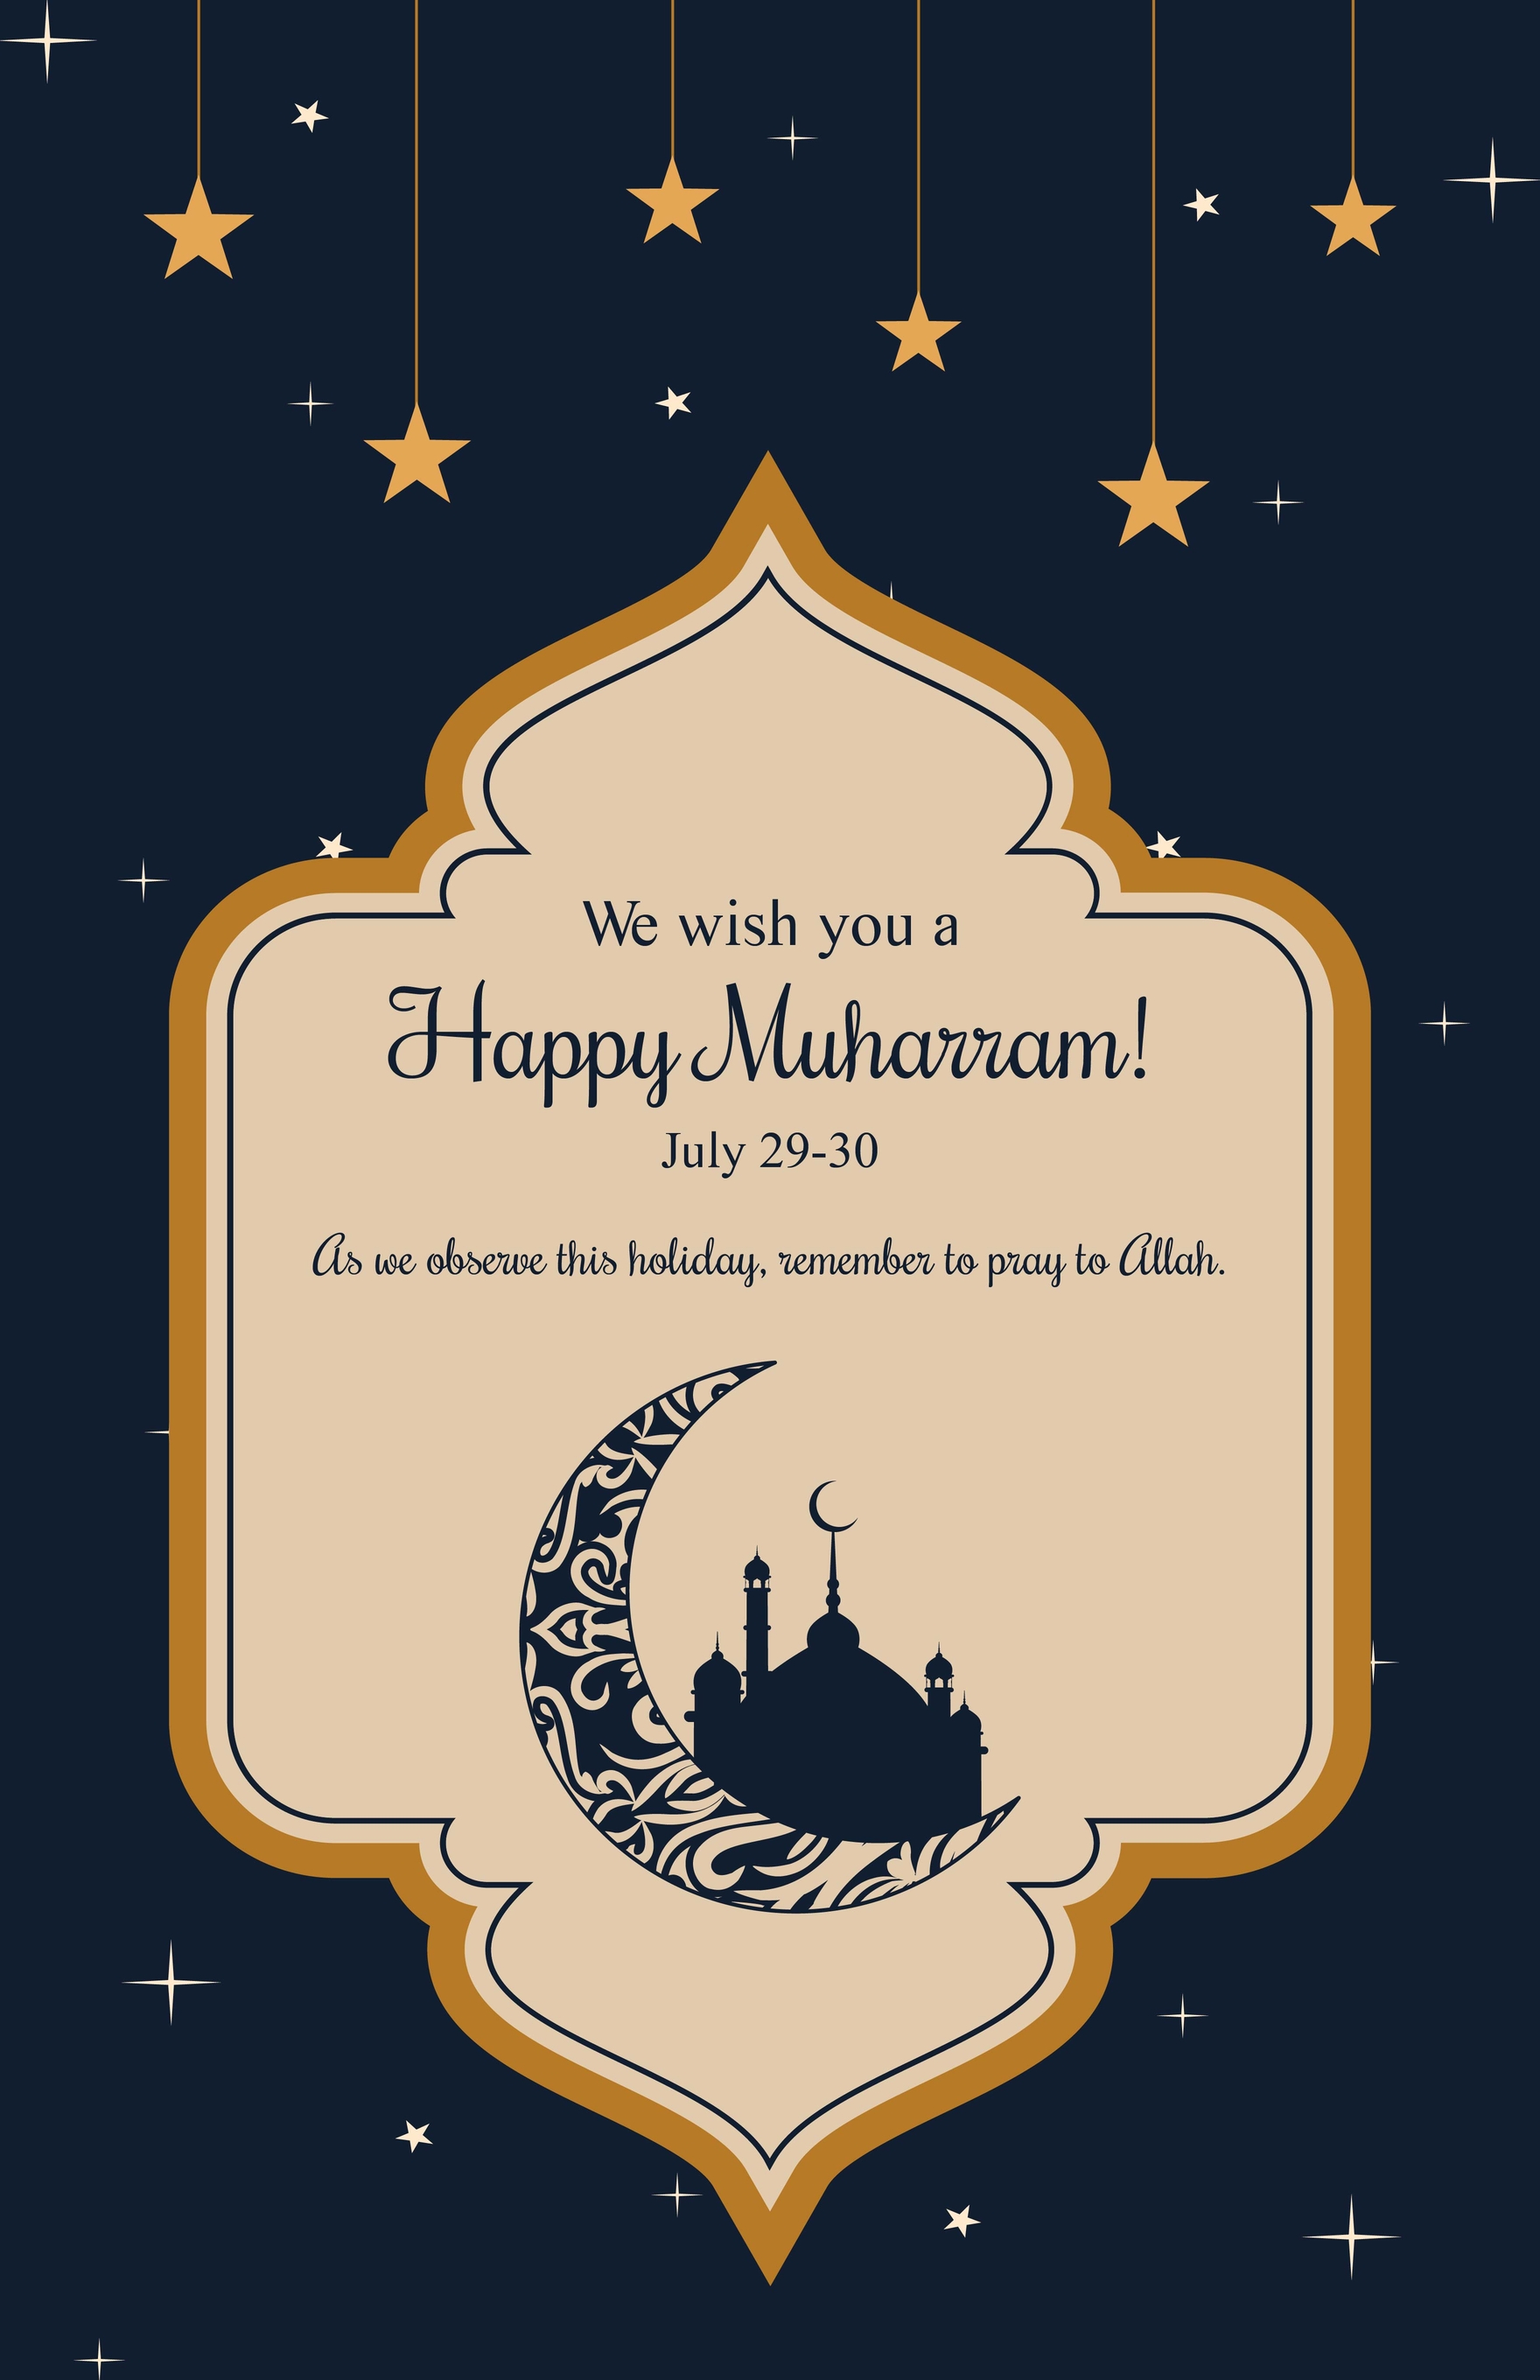 Muharram Wishes Poster in Word, Google Docs, Illustrator, PSD, Apple Pages, Publisher